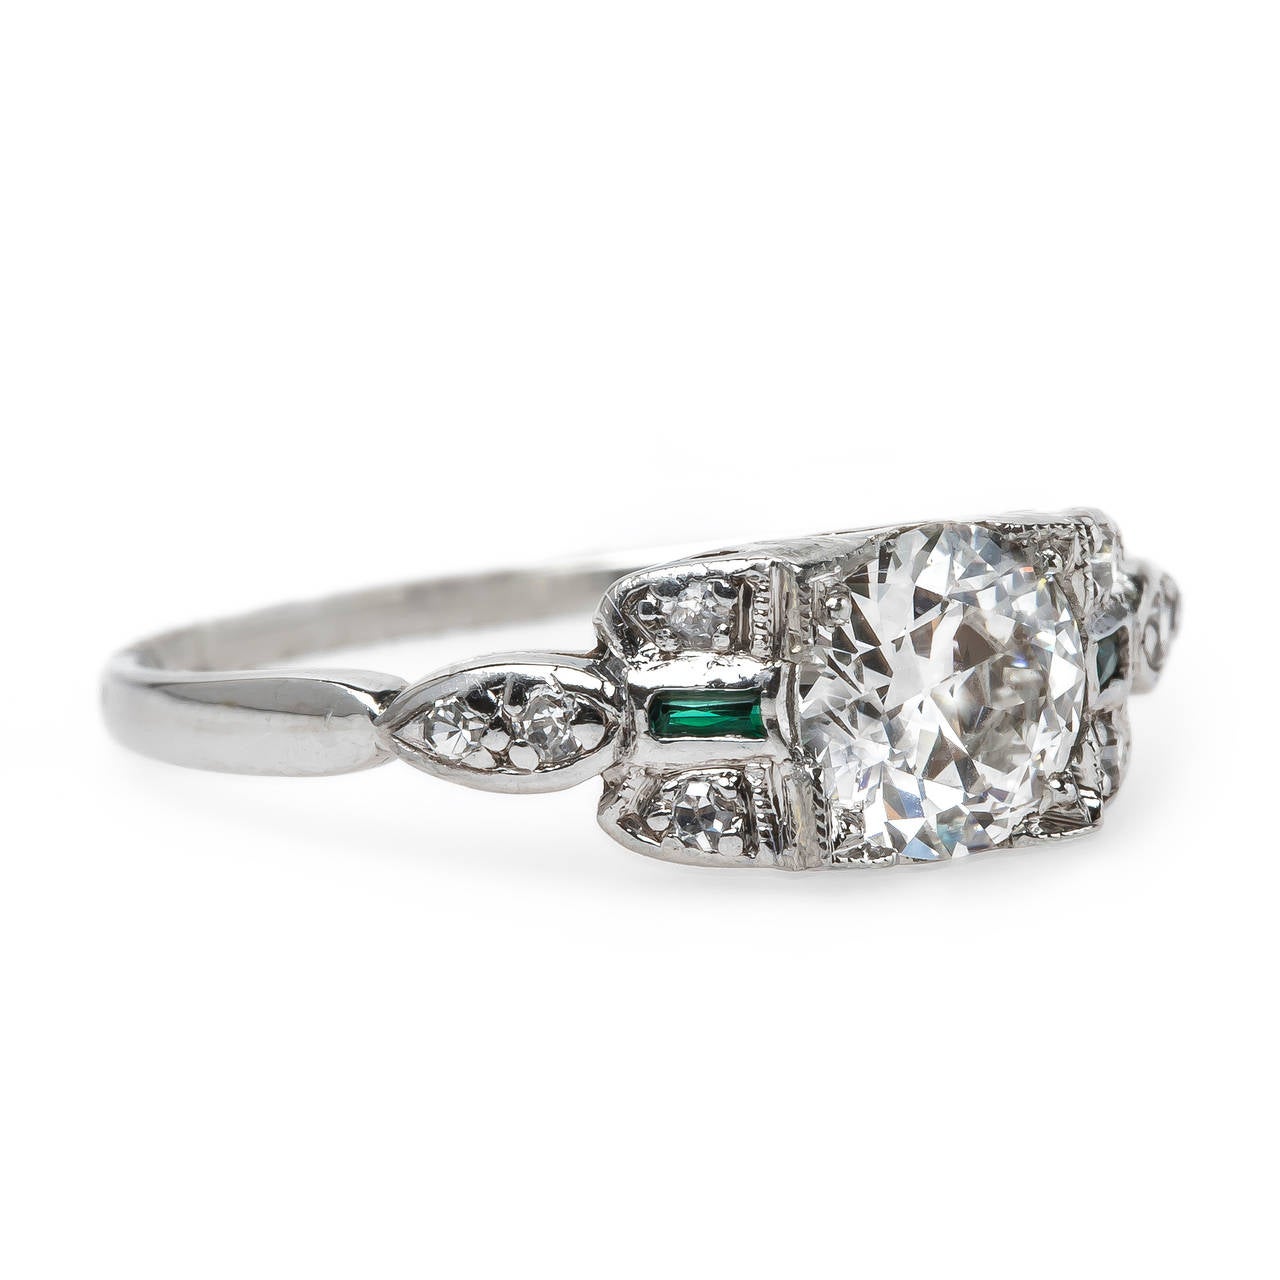 Sydney is a classic authentic Art Deco (circa 1920) platinum ring centering a shimmering box-set 0.70ct GIA certified Round Brilliant Cut diamond graded H color and VS2 clarity. This perfect engagement has a very low profile and is further designed